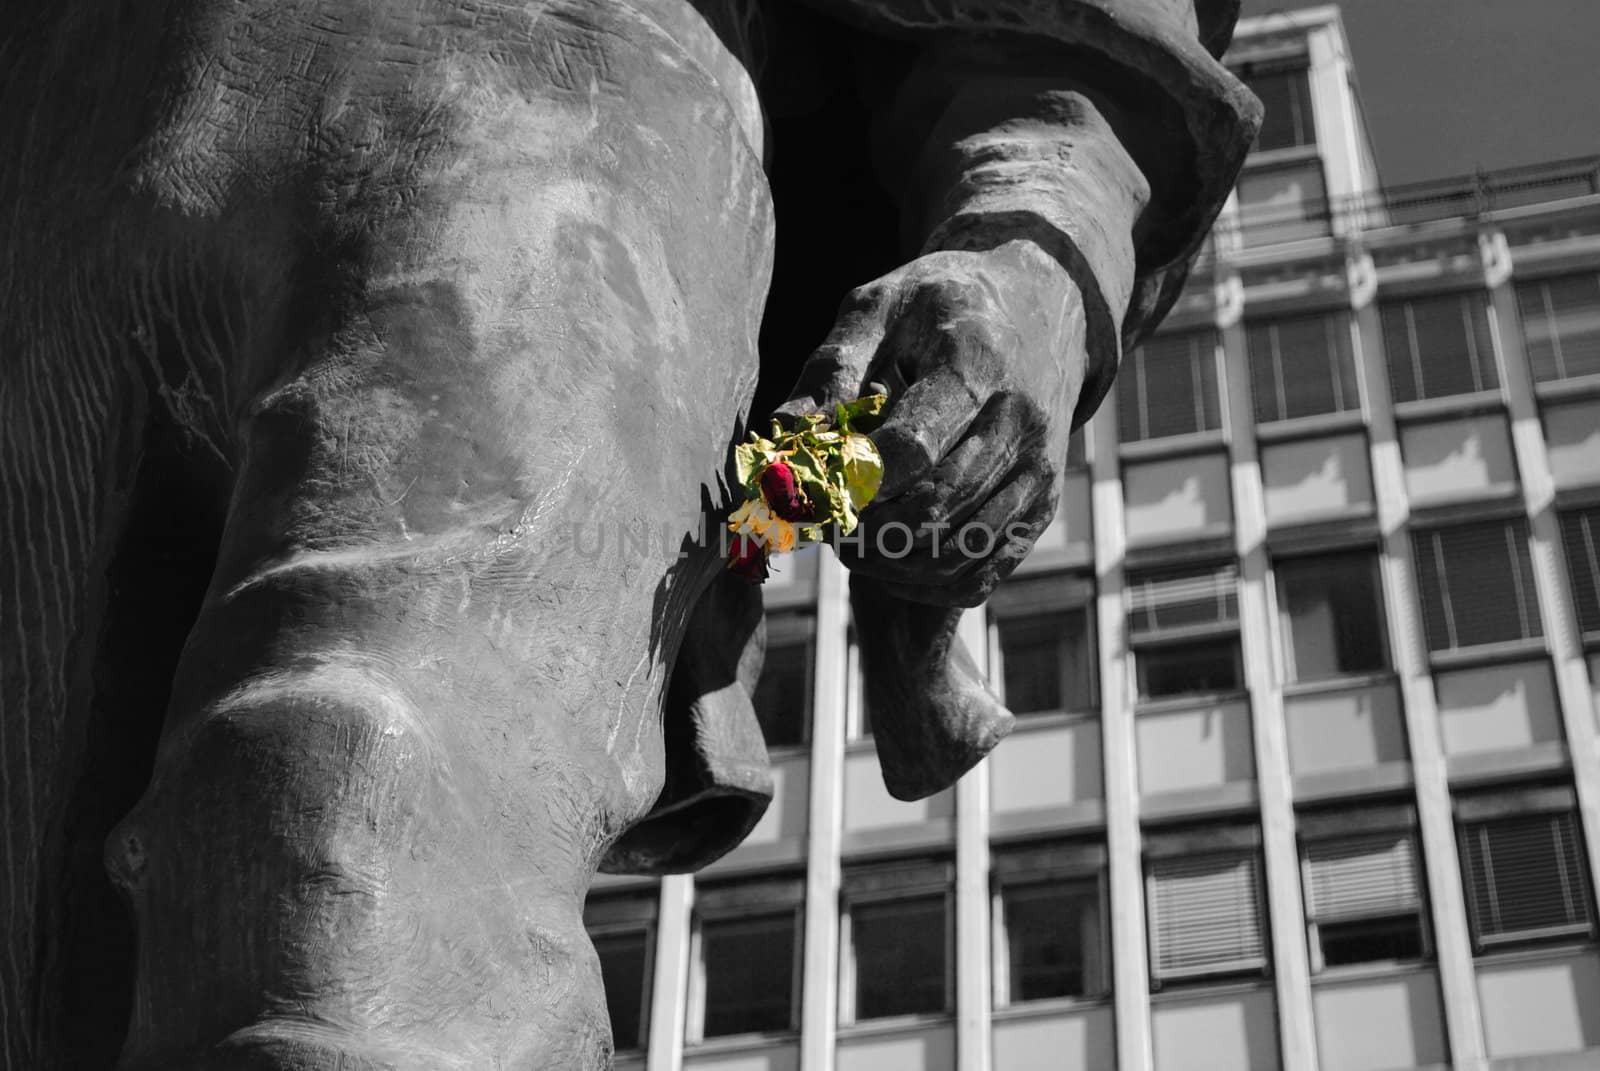 The workers' monument at youngstorget, Oslo, holding a rose in commemoration of the victims after the terrorist attacks 22.07.2012.